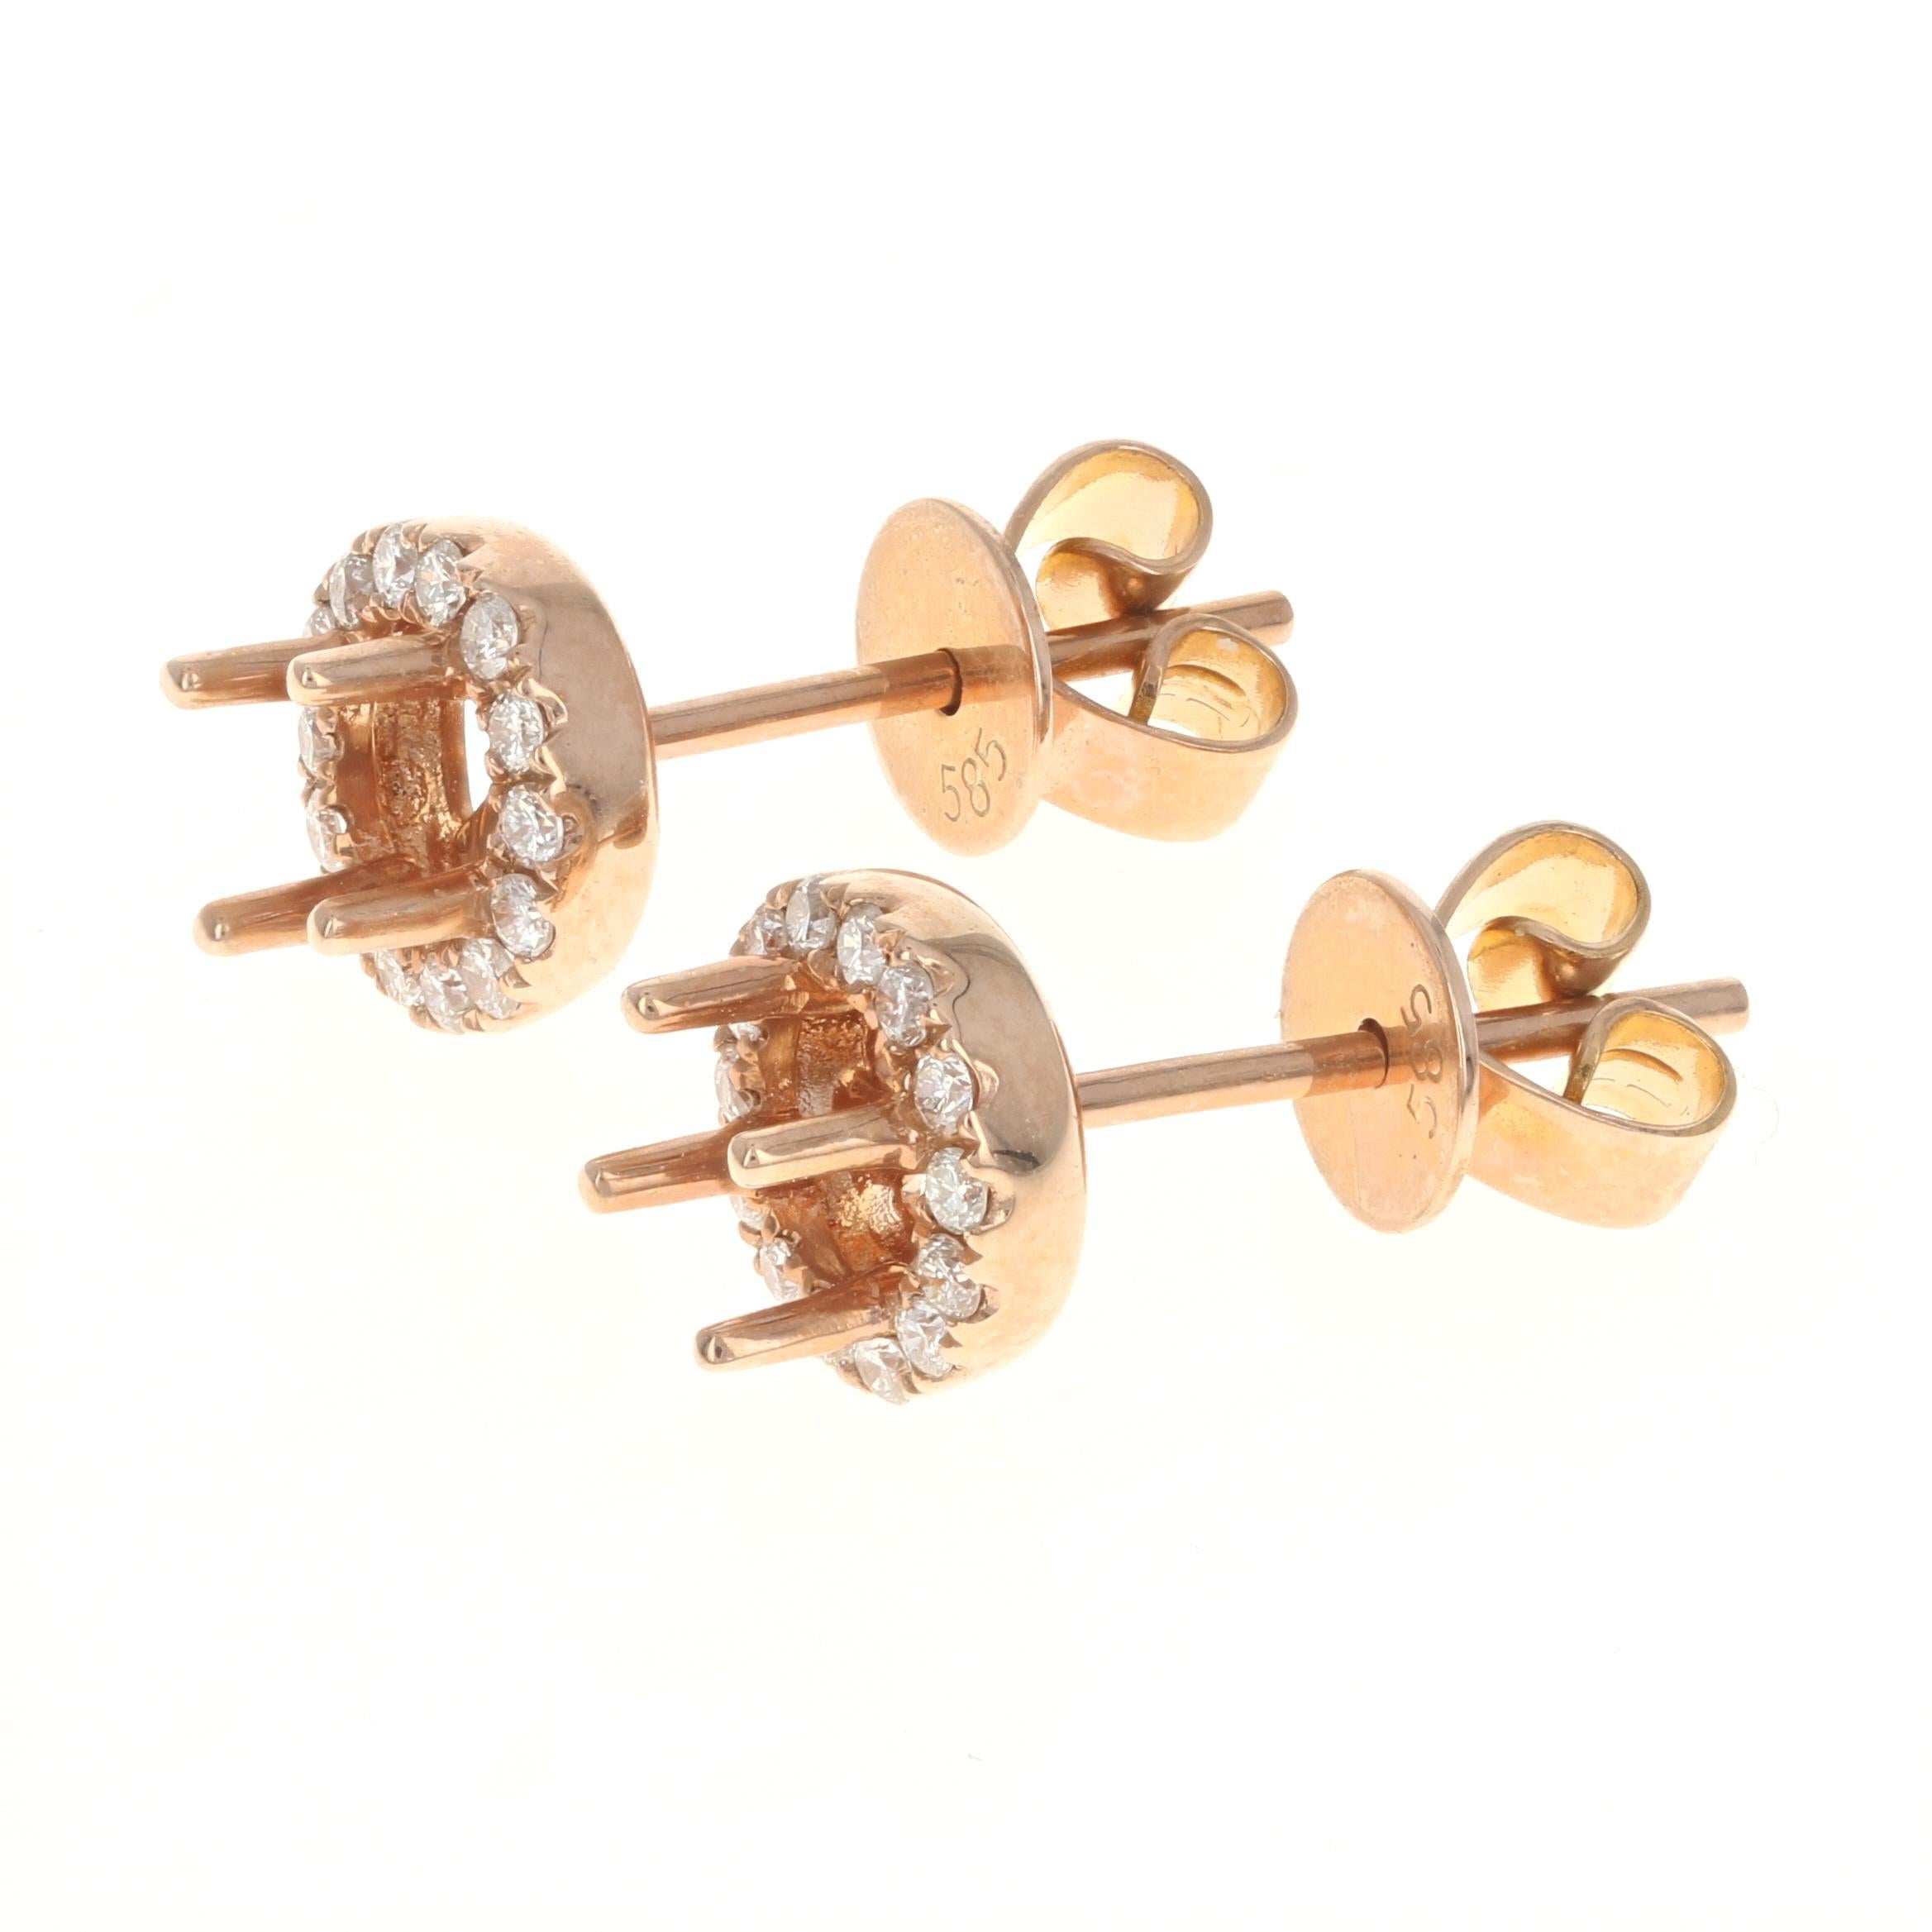 This lovely pair of new rose gold earrings would be the perfect choice to host a set of gemstones or diamonds! The earrings are adorned with 1/5ctw natural white diamonds (see below for more stone info) that are done in prong held halo fashions